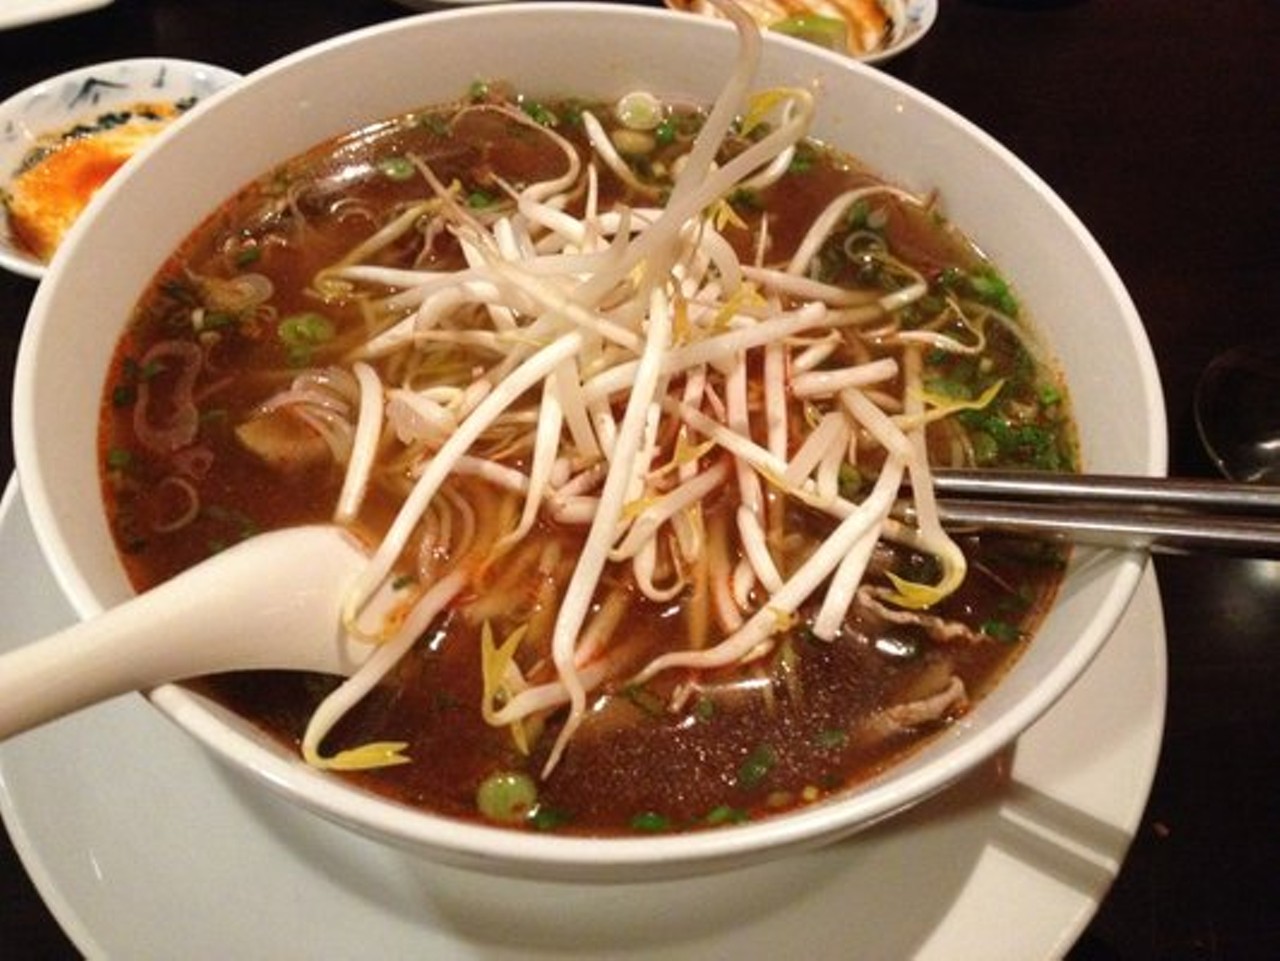 Bowl of Pho is located at 27339 Chagrin Blvd, Woodmere. Call (216)831-1730 or visit www.bowlofpho2011.com for more information.